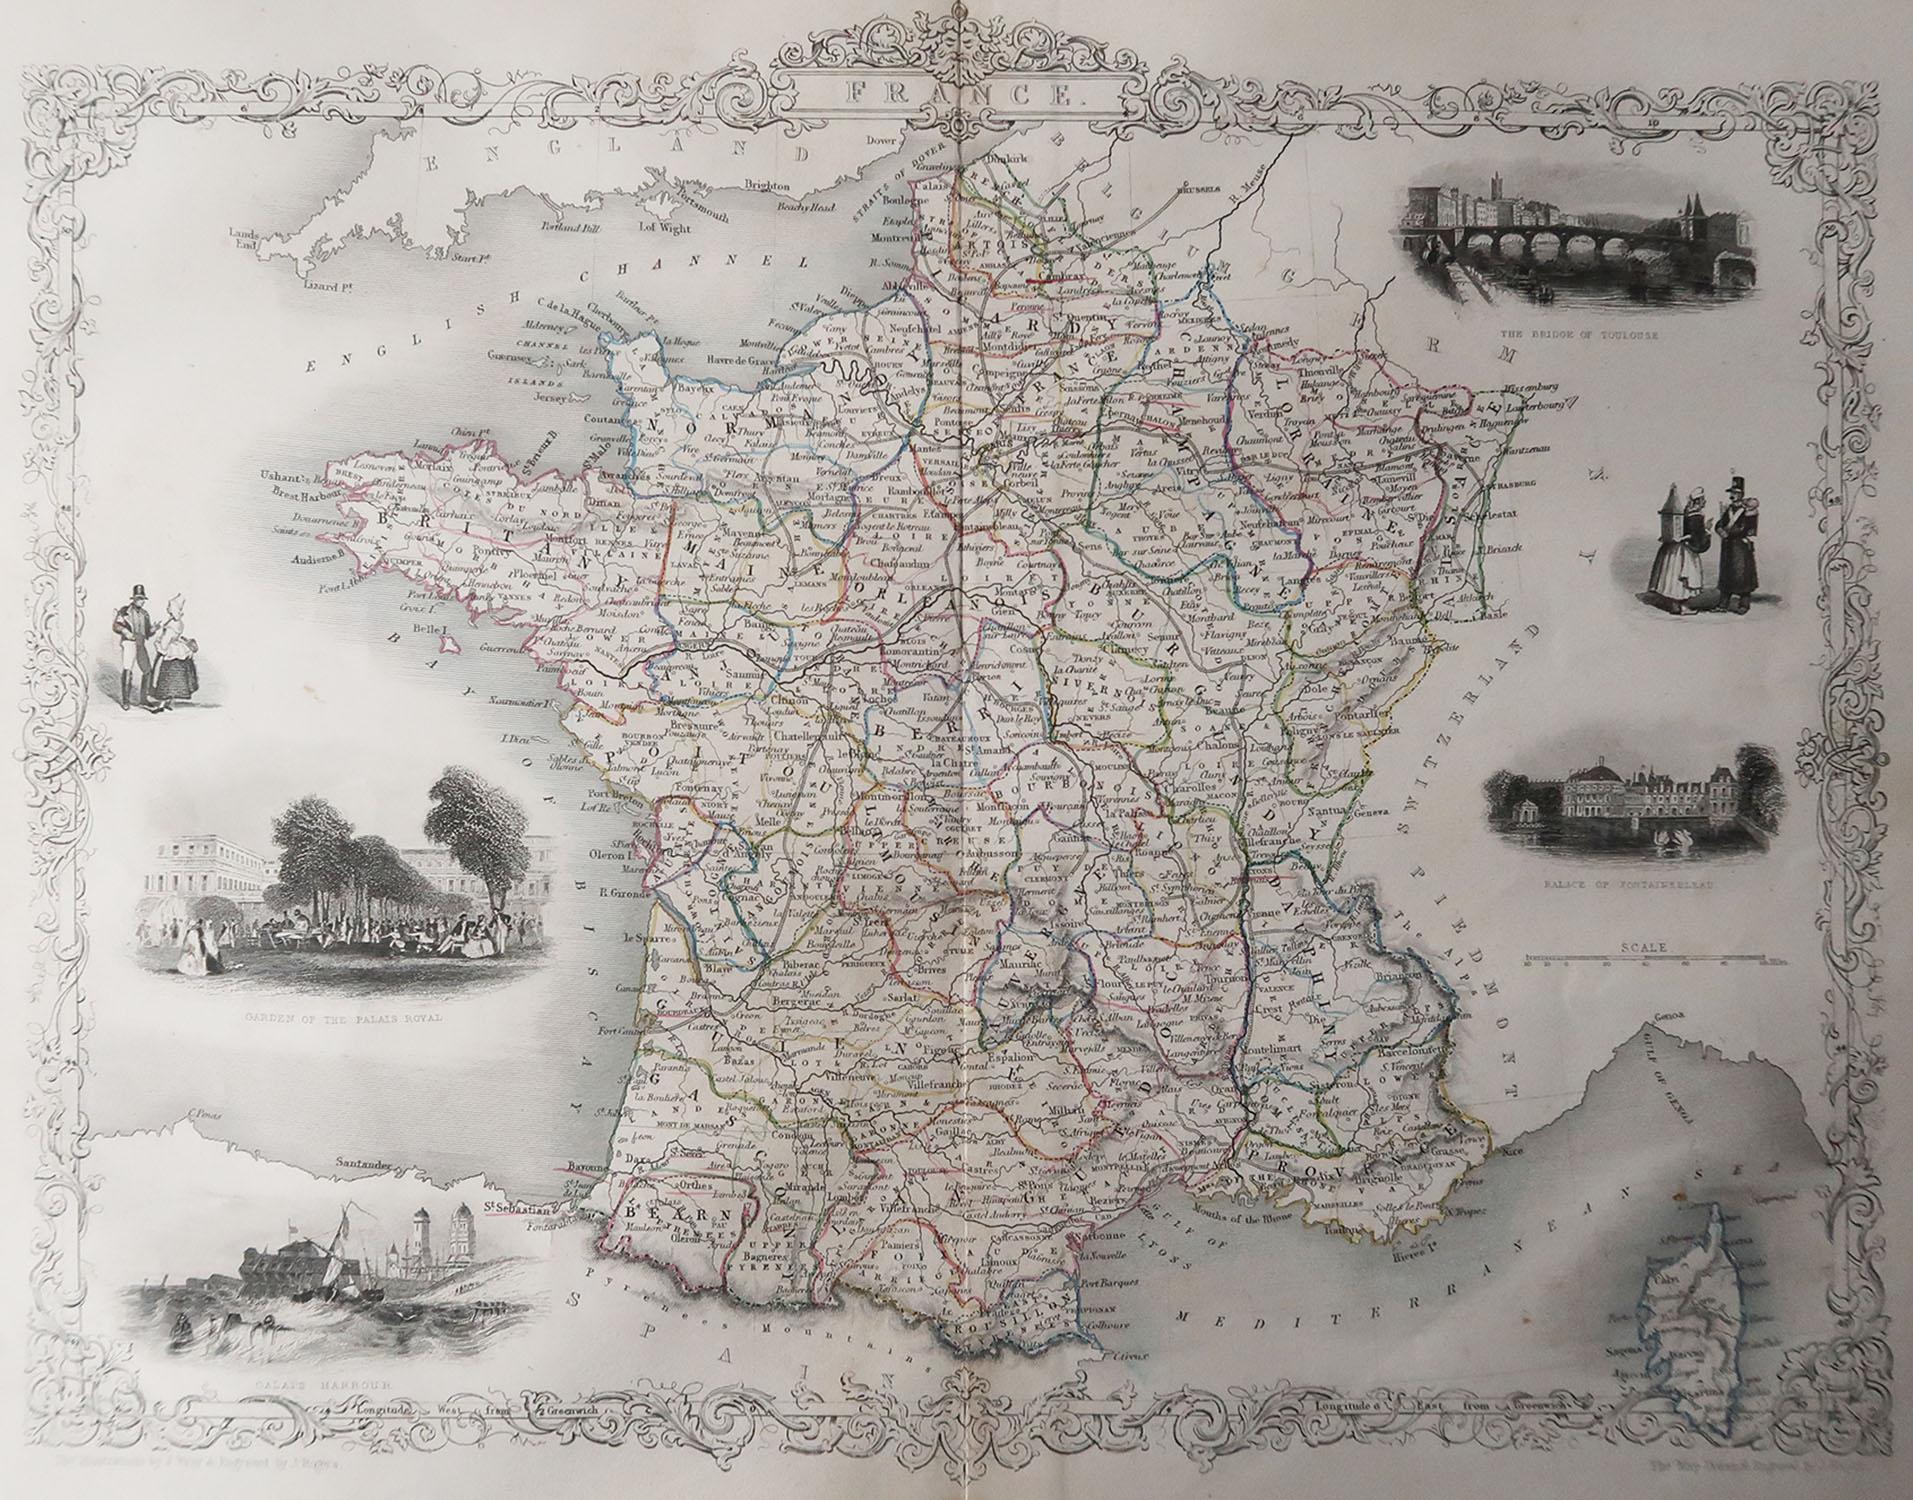 Great map of France

Steel engraving

Many lovely vignettes 

Published by London Printing & Publishing Co. ( Formerly Tallis ), C.1850

Original colour

Free shipping.

